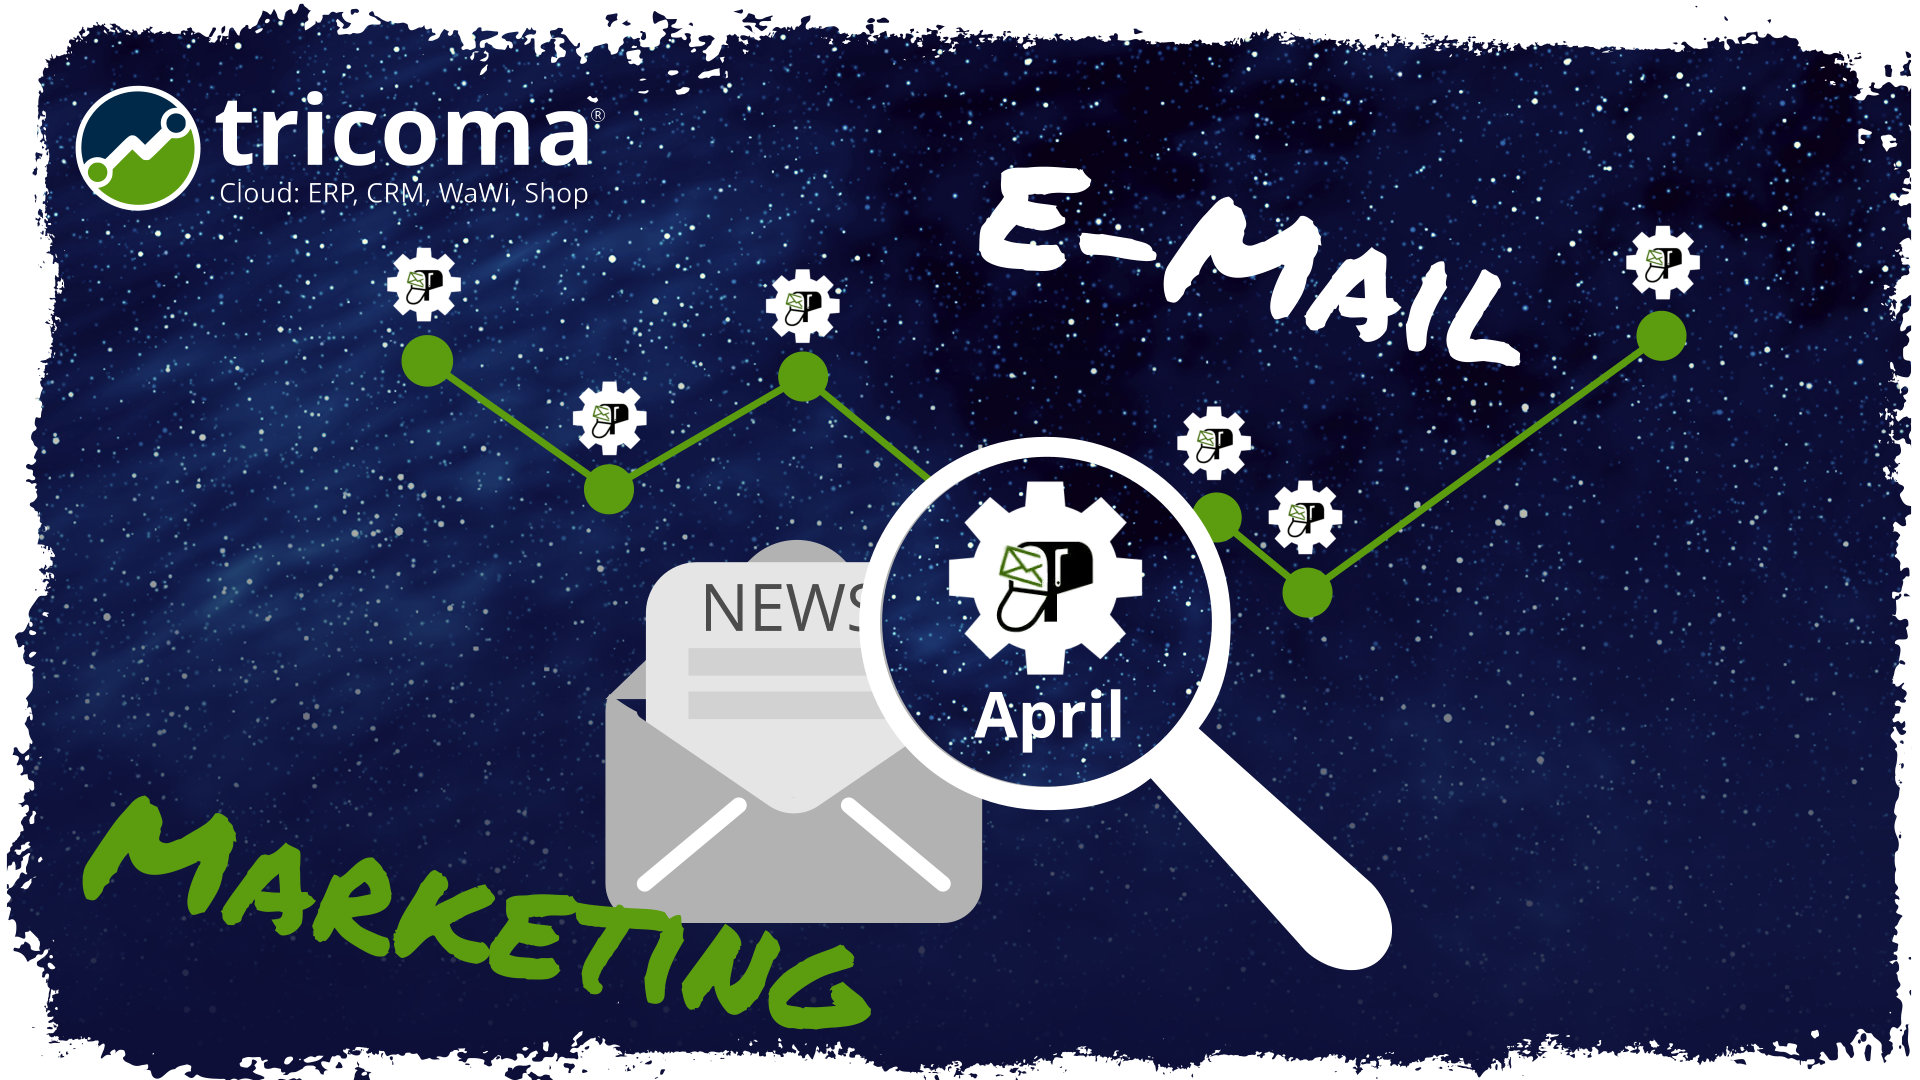 App Launch Email Marketing